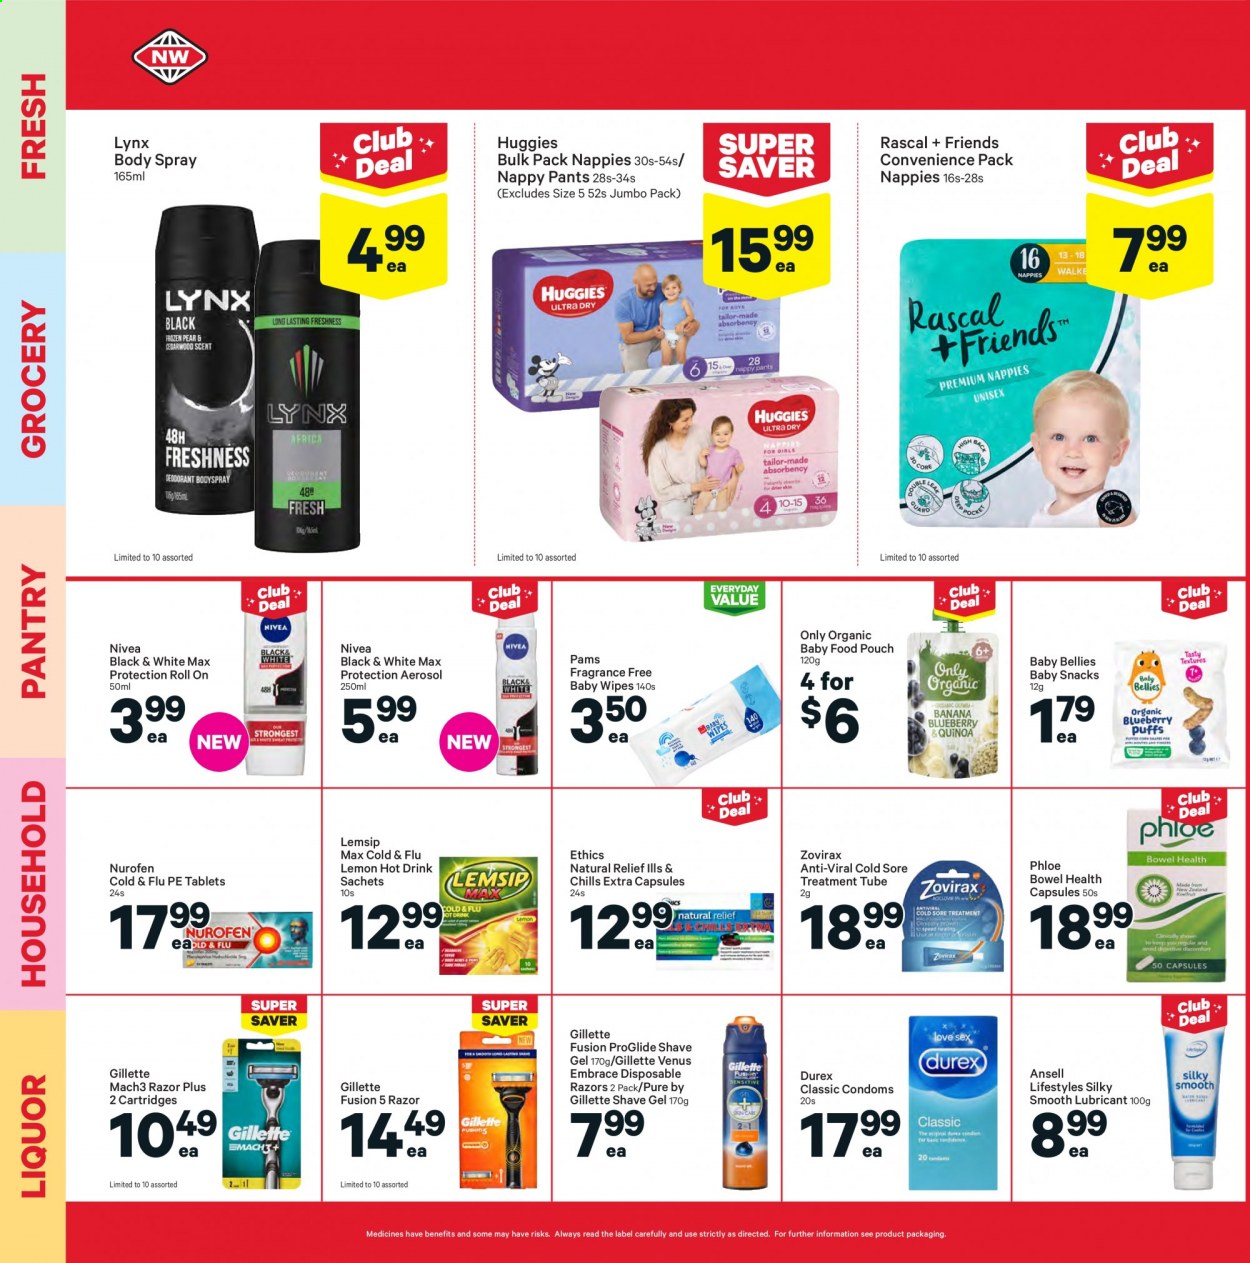 thumbnail - New World mailer - 06.09.2021 - 12.09.2021 - Sales products - snack, liquor, baby food pouch, organic baby food, wipes, Huggies, pants, baby wipes, nappies, Nivea, body spray, roll-on, Gillette, razor, shave gel, Venus, disposable razor, Cold & Flu, Nurofen. Page 22.